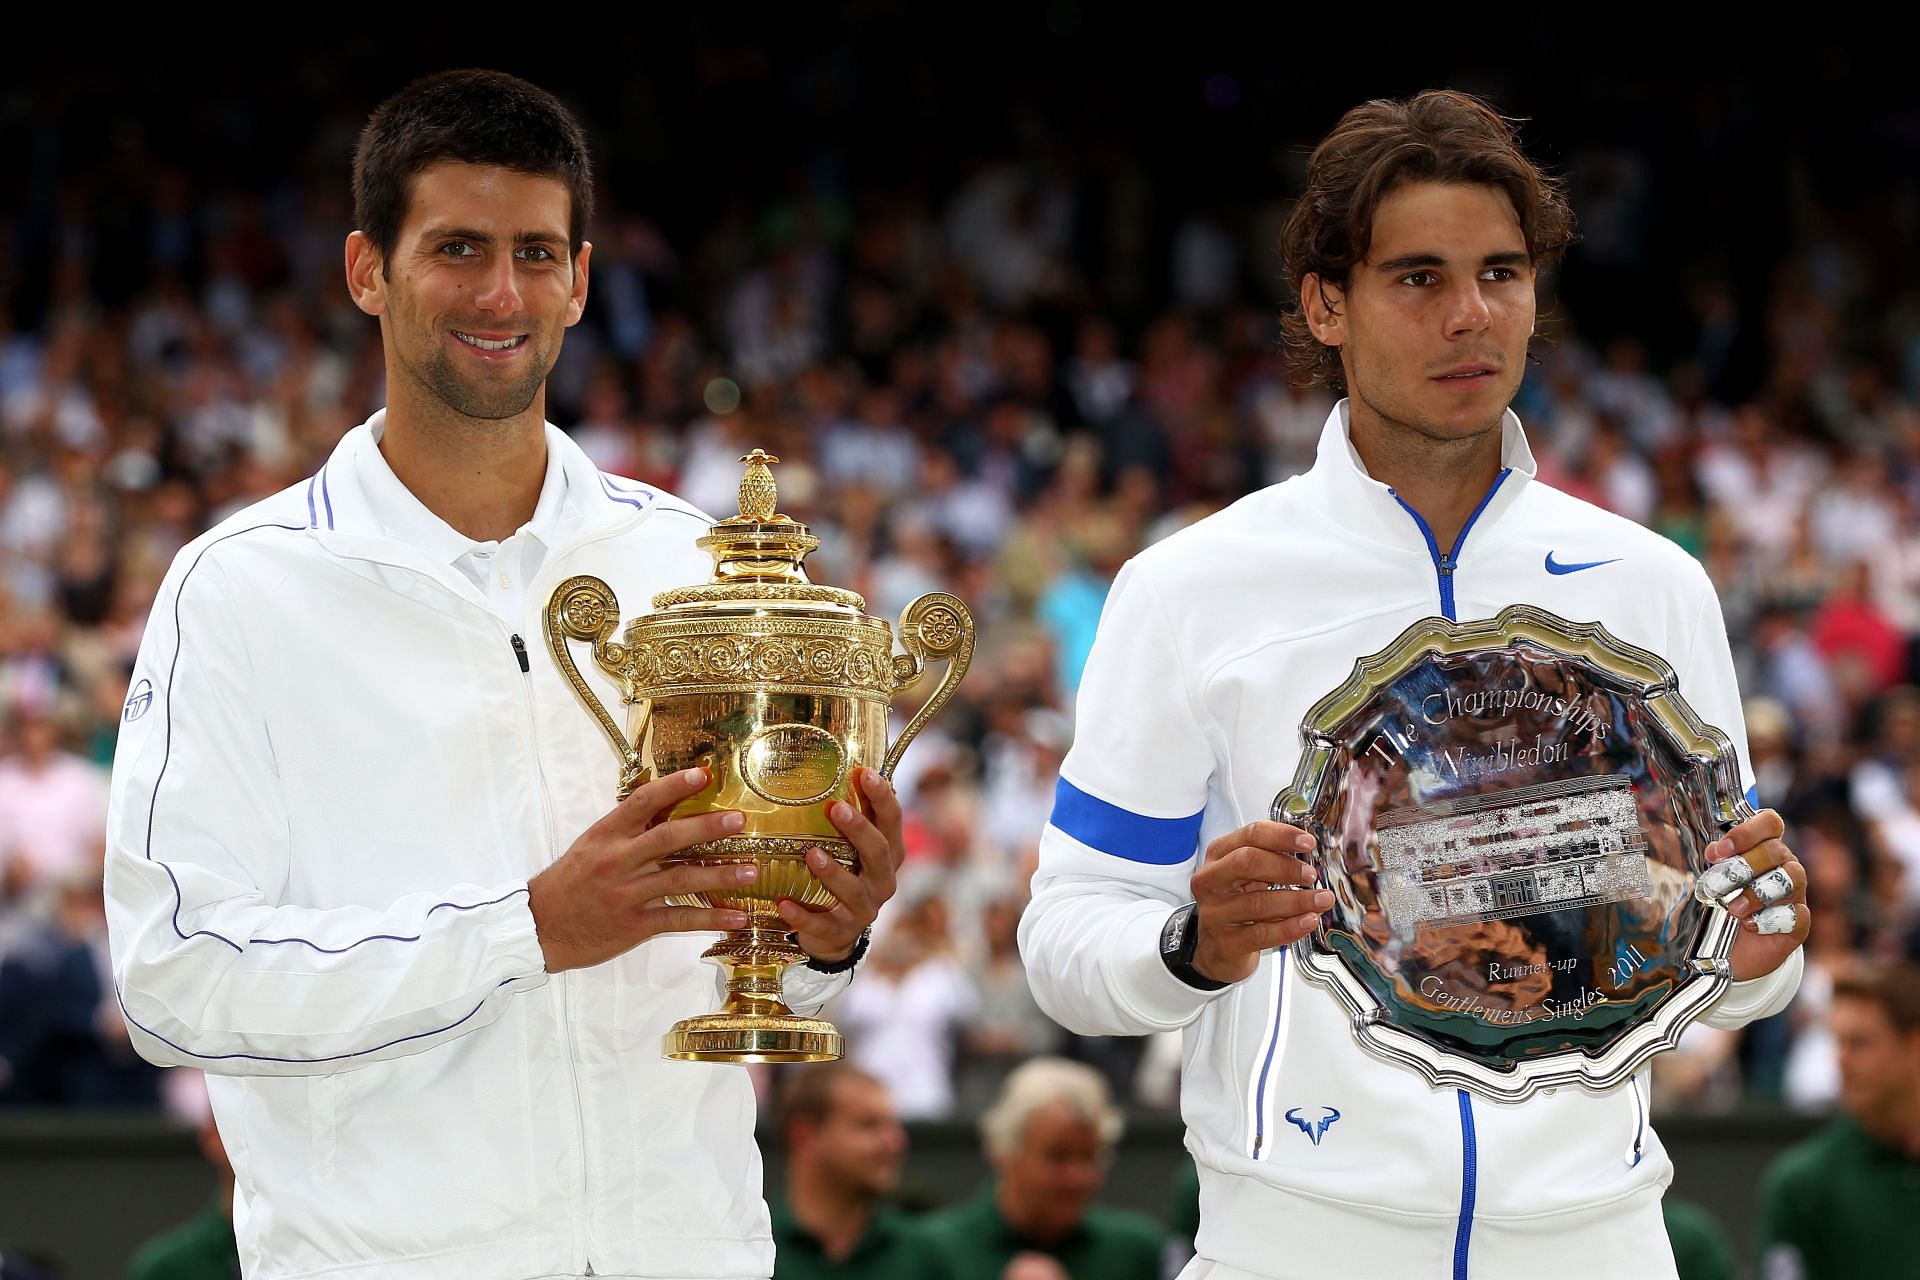 Nadal and Djokovic have a split head-to-head while Djokovic leads Federer on grass